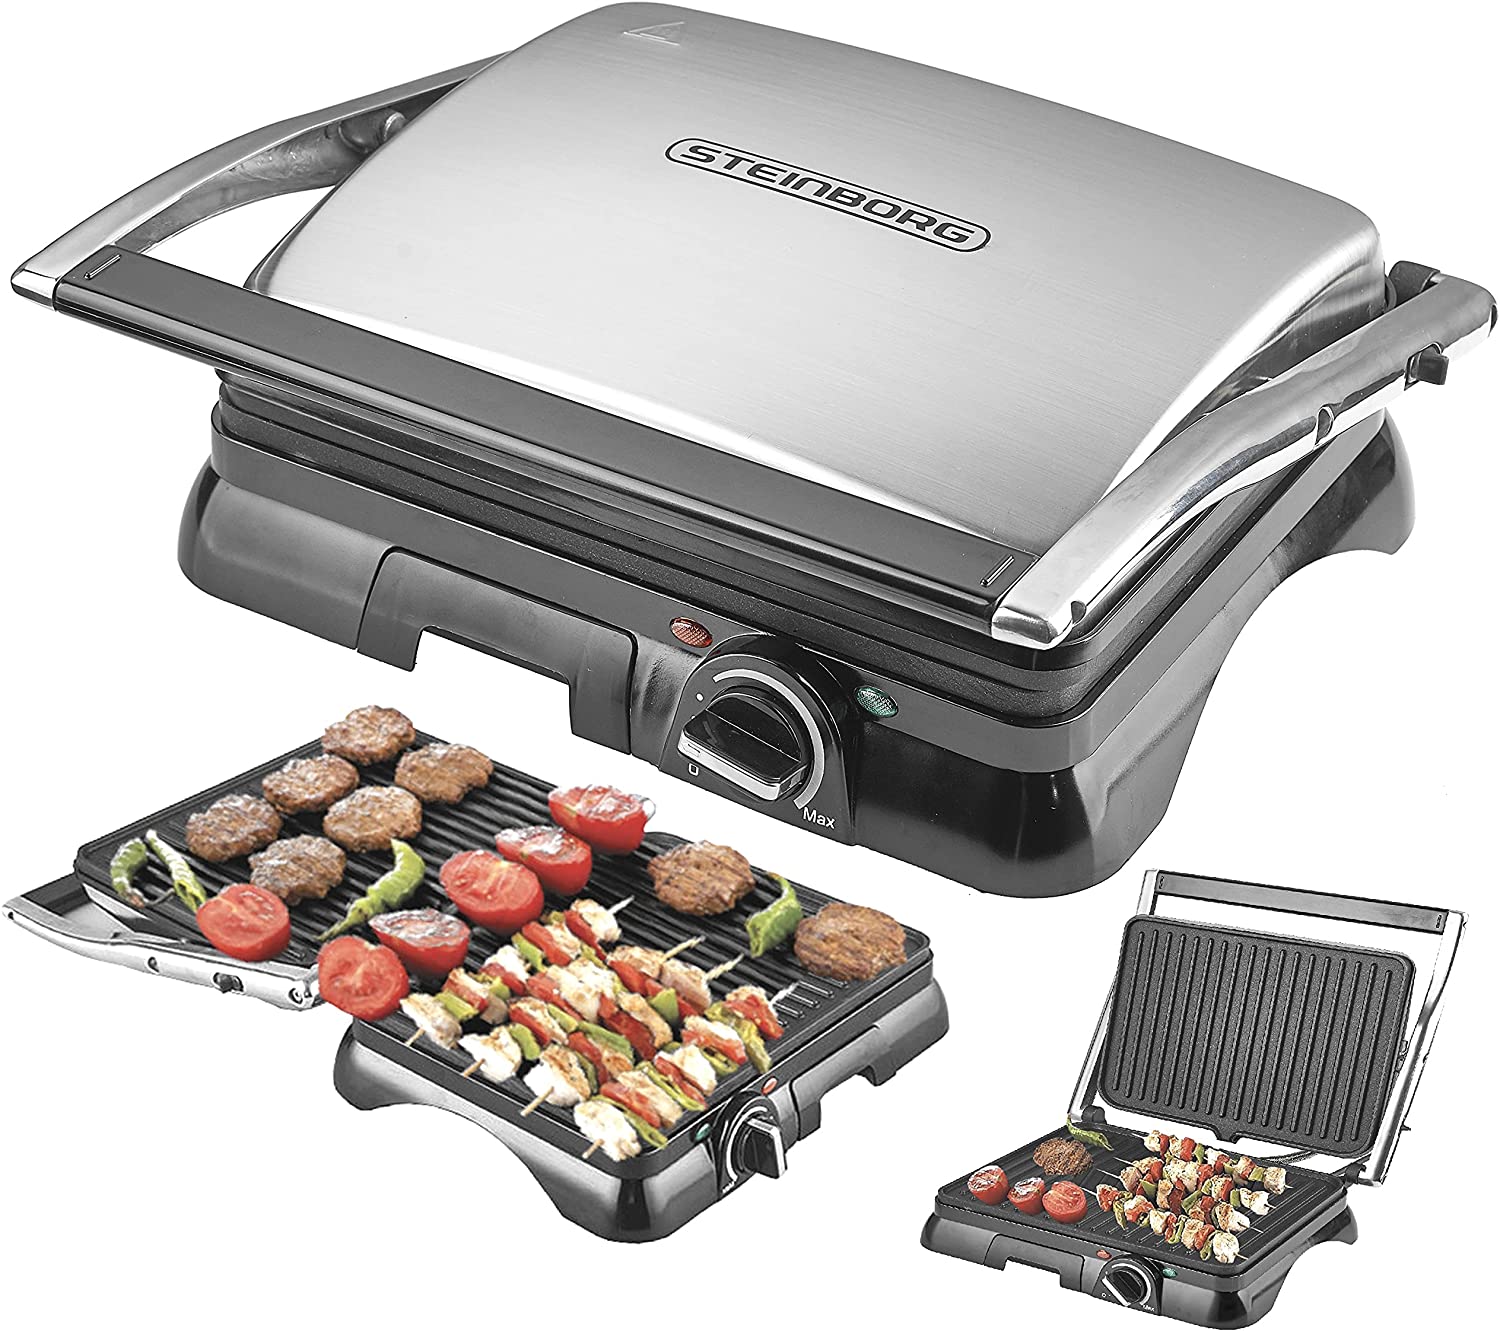 Steinborg Contact Grill, 2,100 Watt, Electric Table Grill, Electric Grill, Panini Grill, Sandwich Toaster, Non-Stick Coating, Thermostat, Cool Touch Technology, Grease Drip Tray